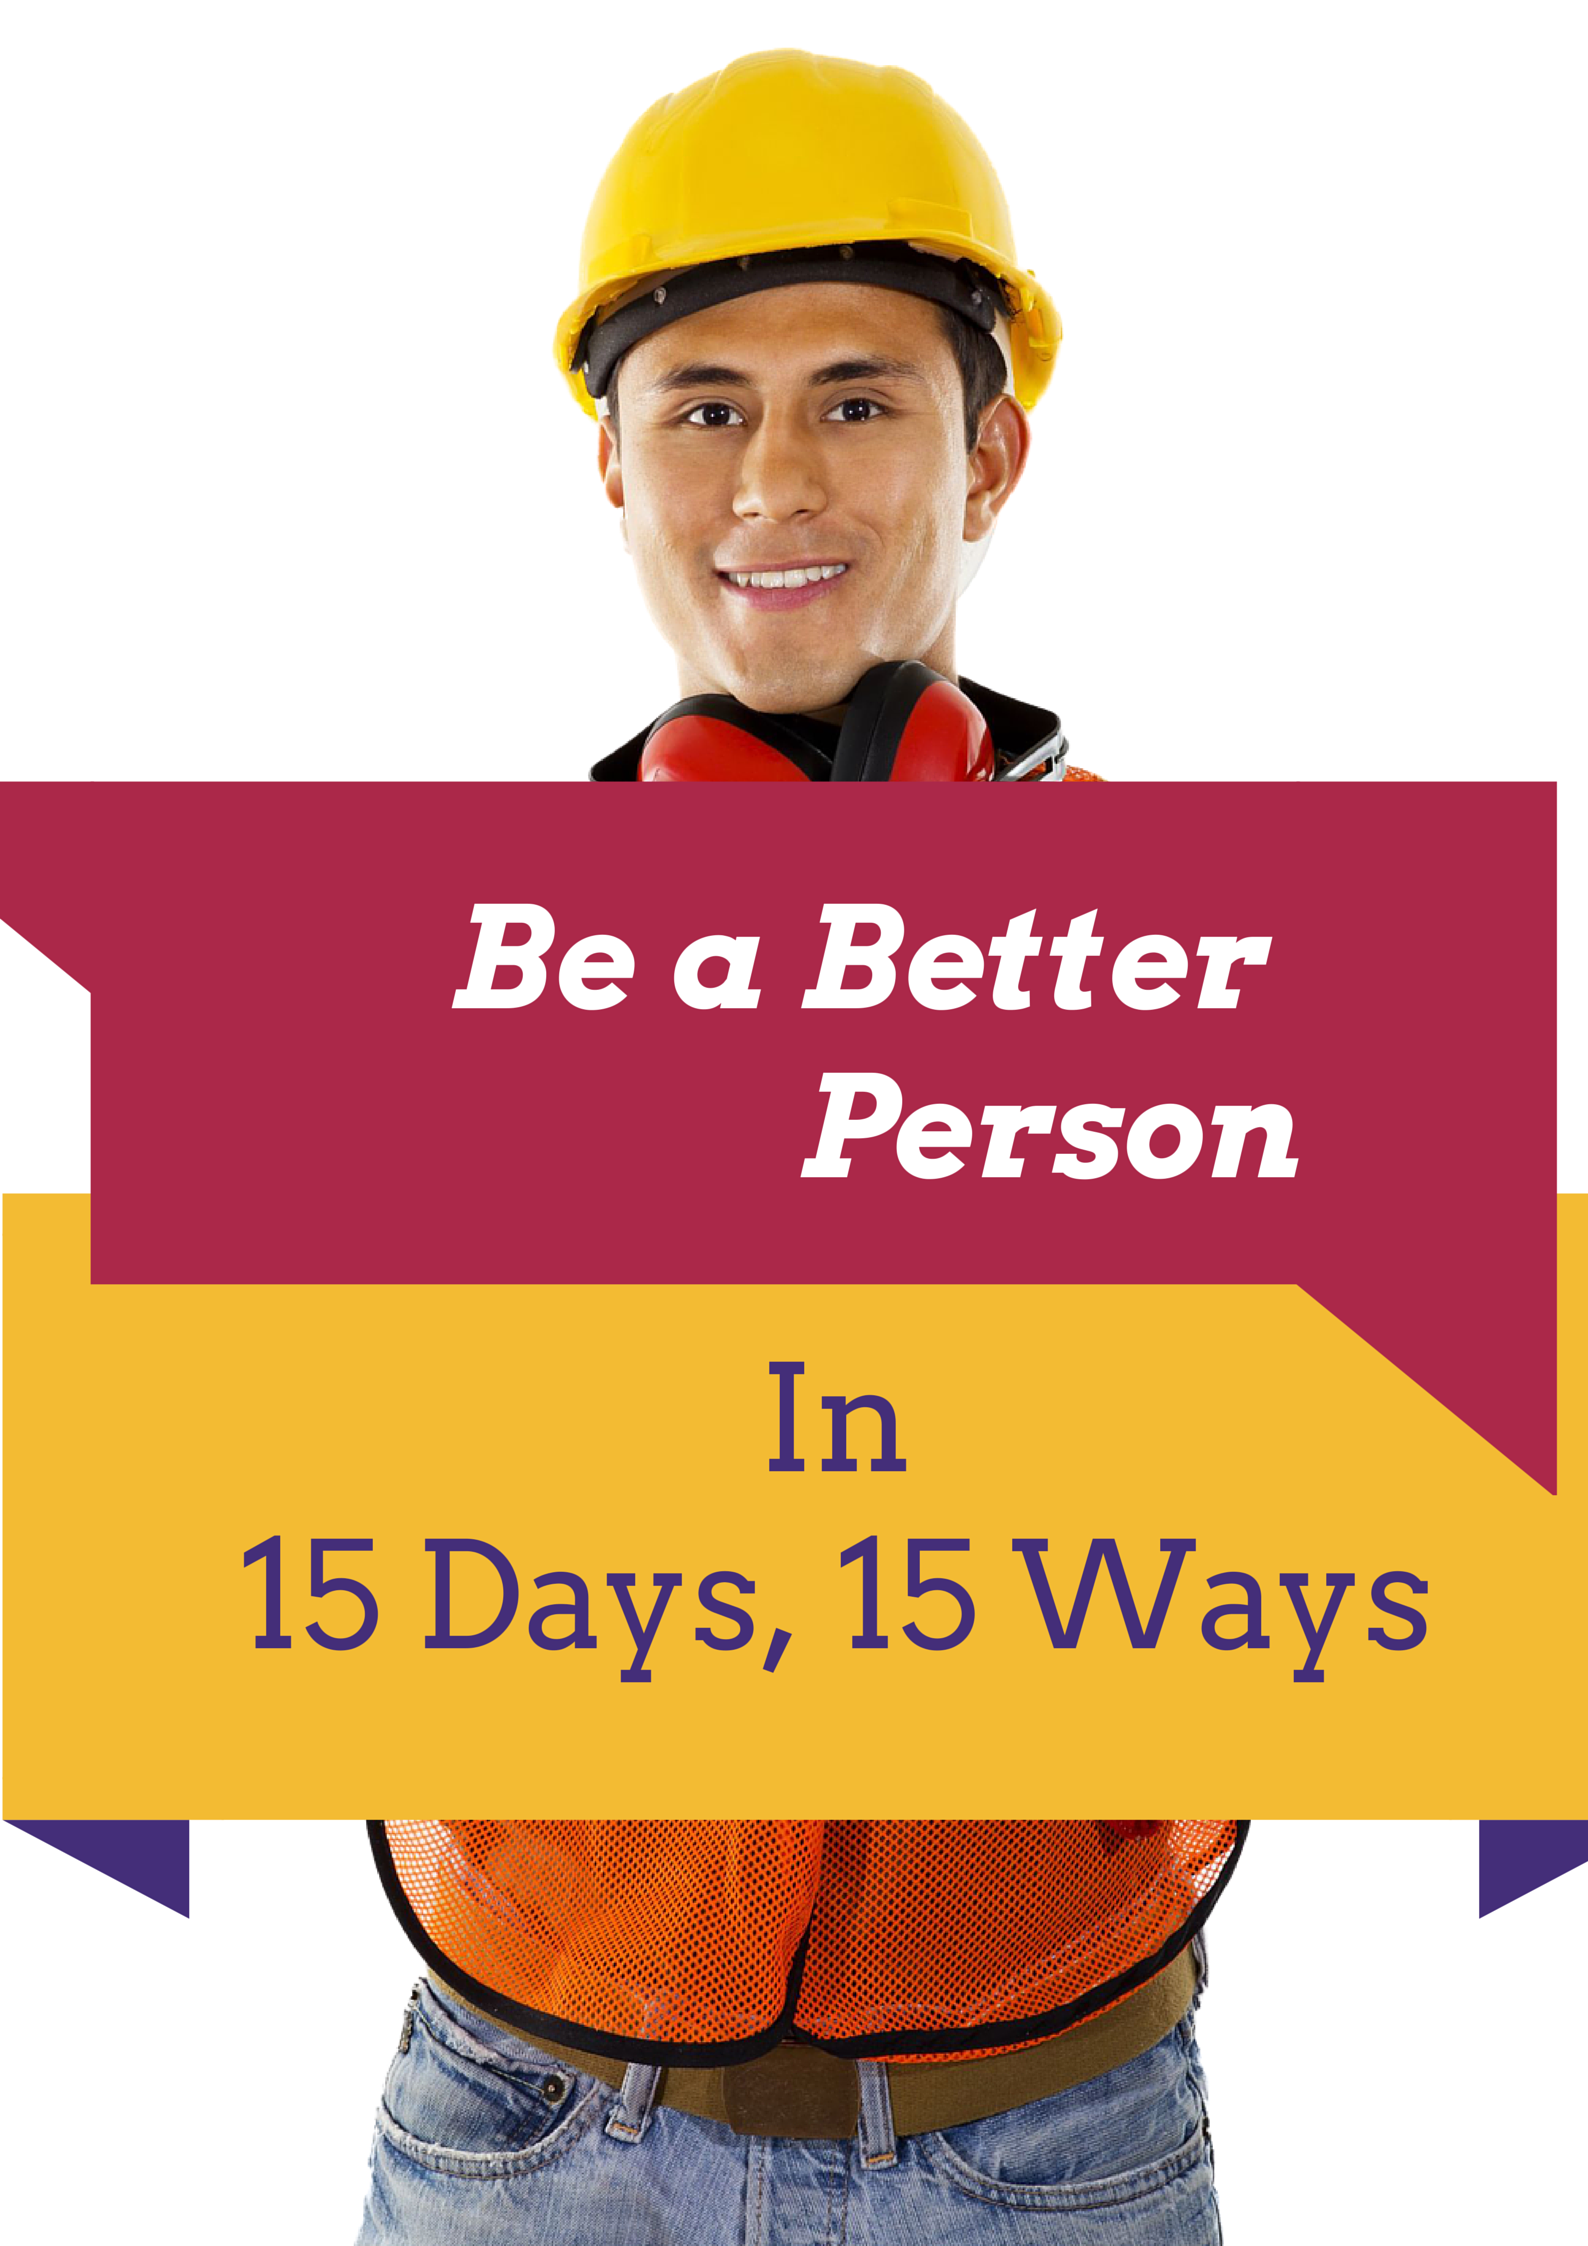 Bet a Better Person in 15 Days and 15 Ways